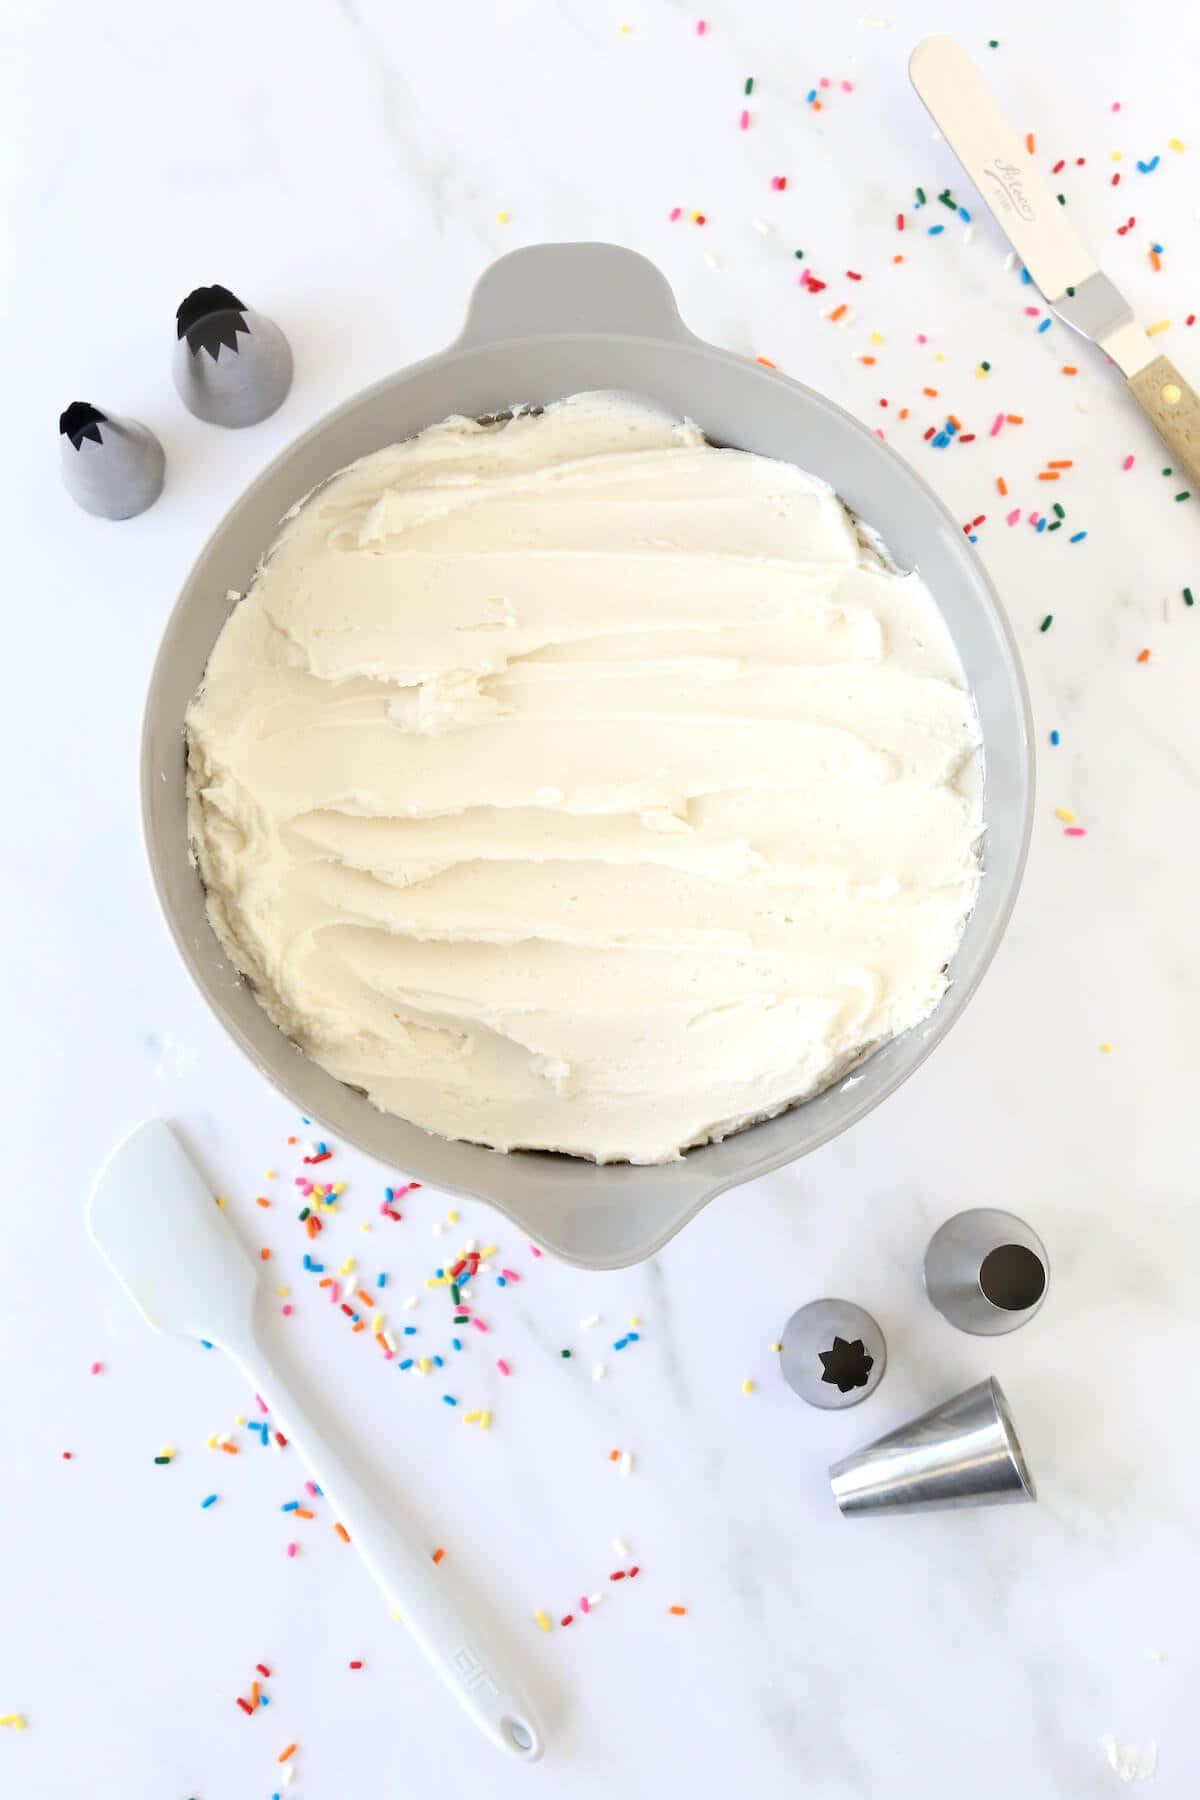 Indulge In The Sweetest Treat: A Big Slice of Deliciously Soft Buttercream Cake Wallpaper